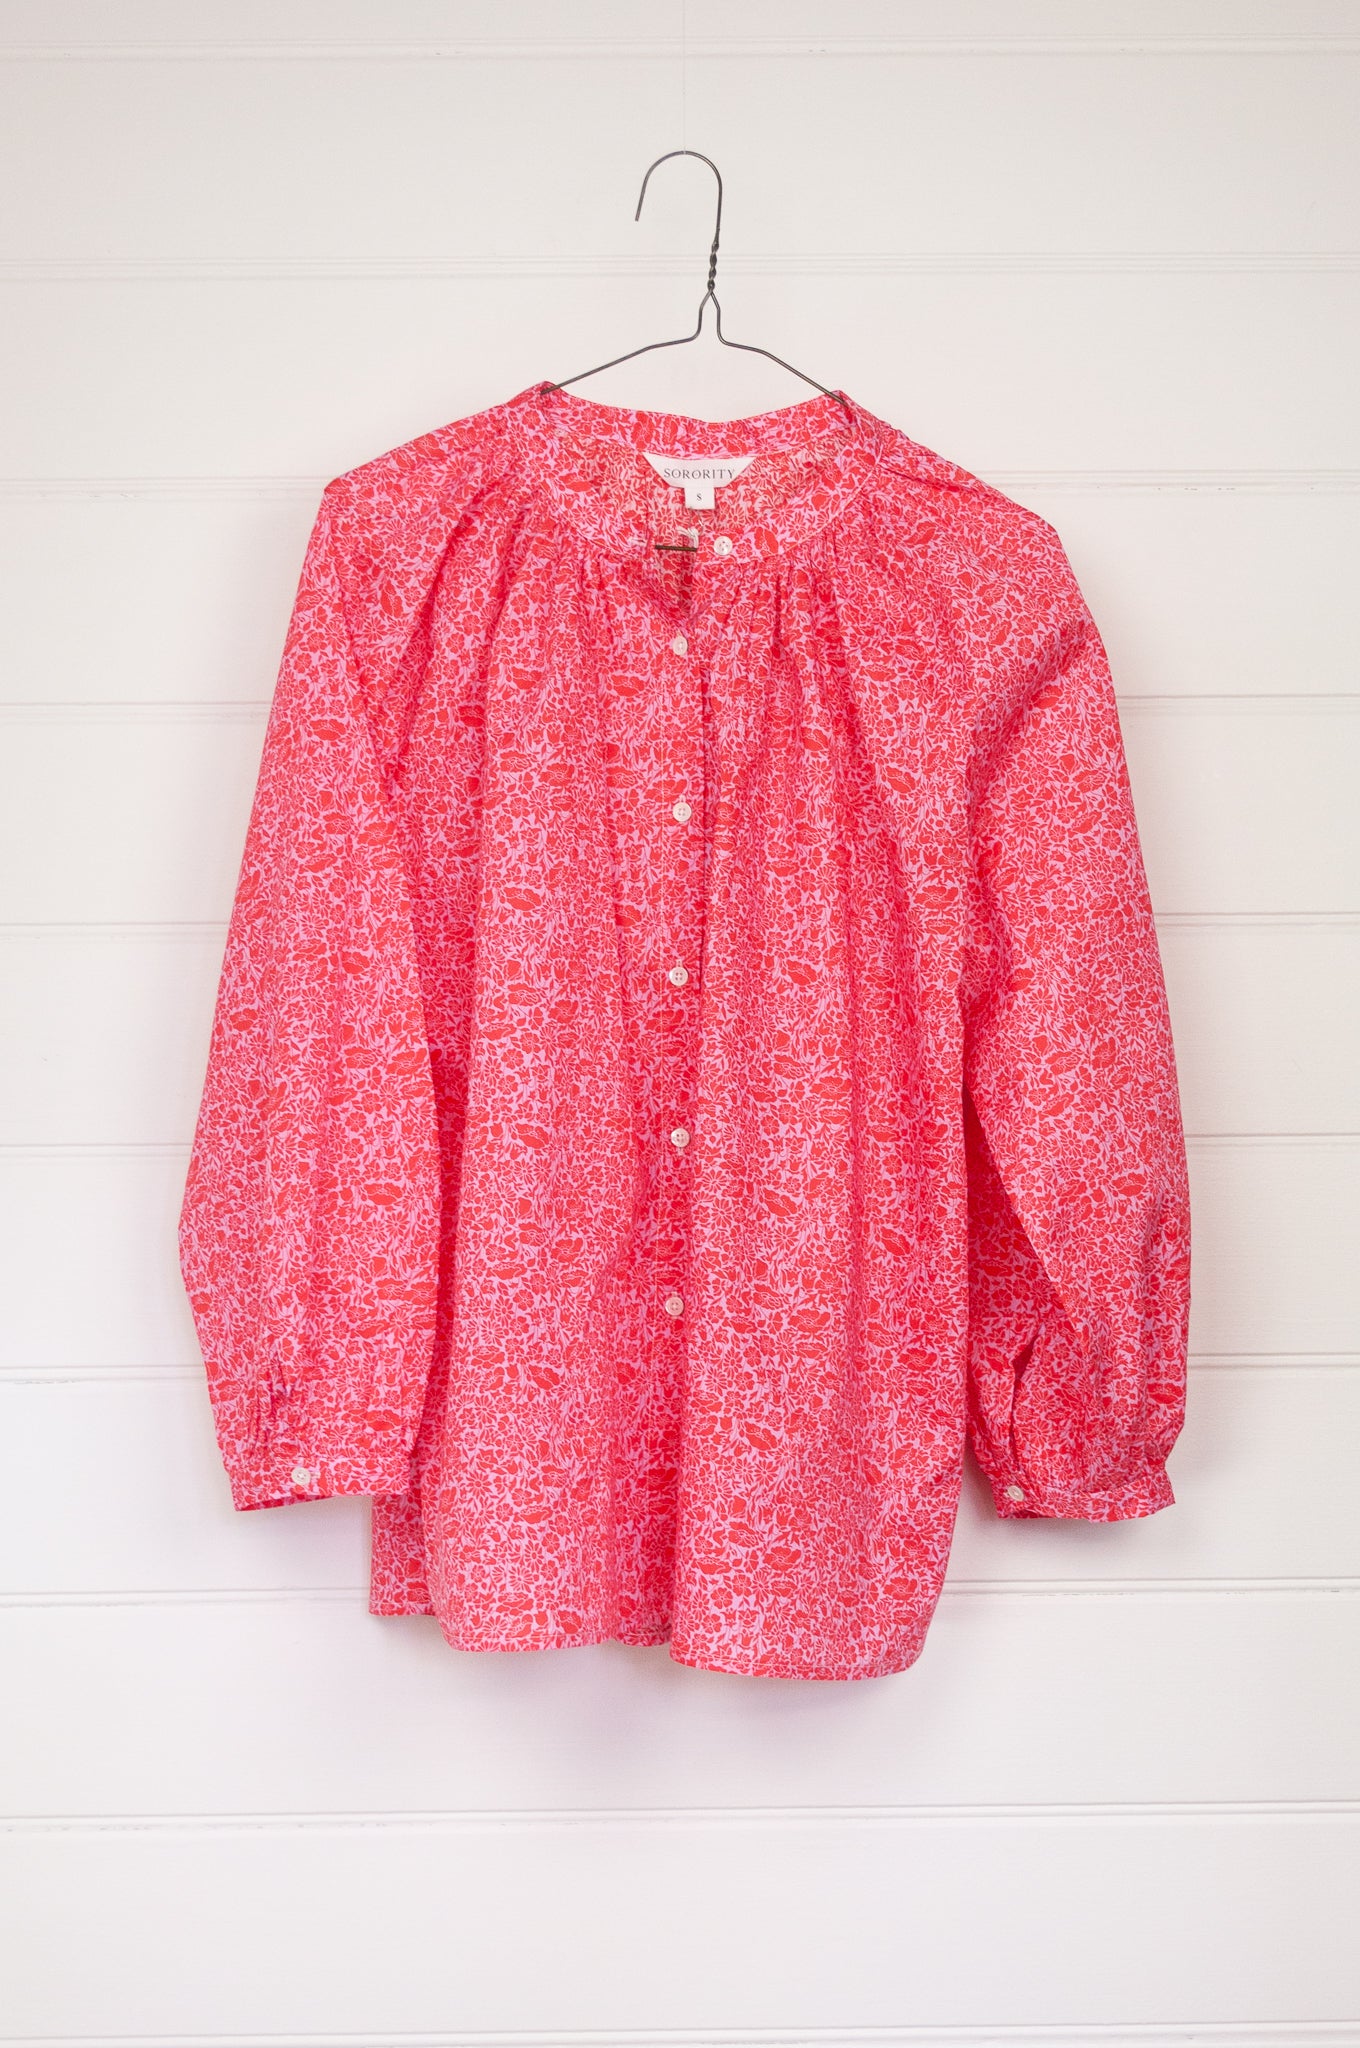 Sorority Liberty tana lawn gathered neck loose fit blouse in Poppy Day pink and red floral print.